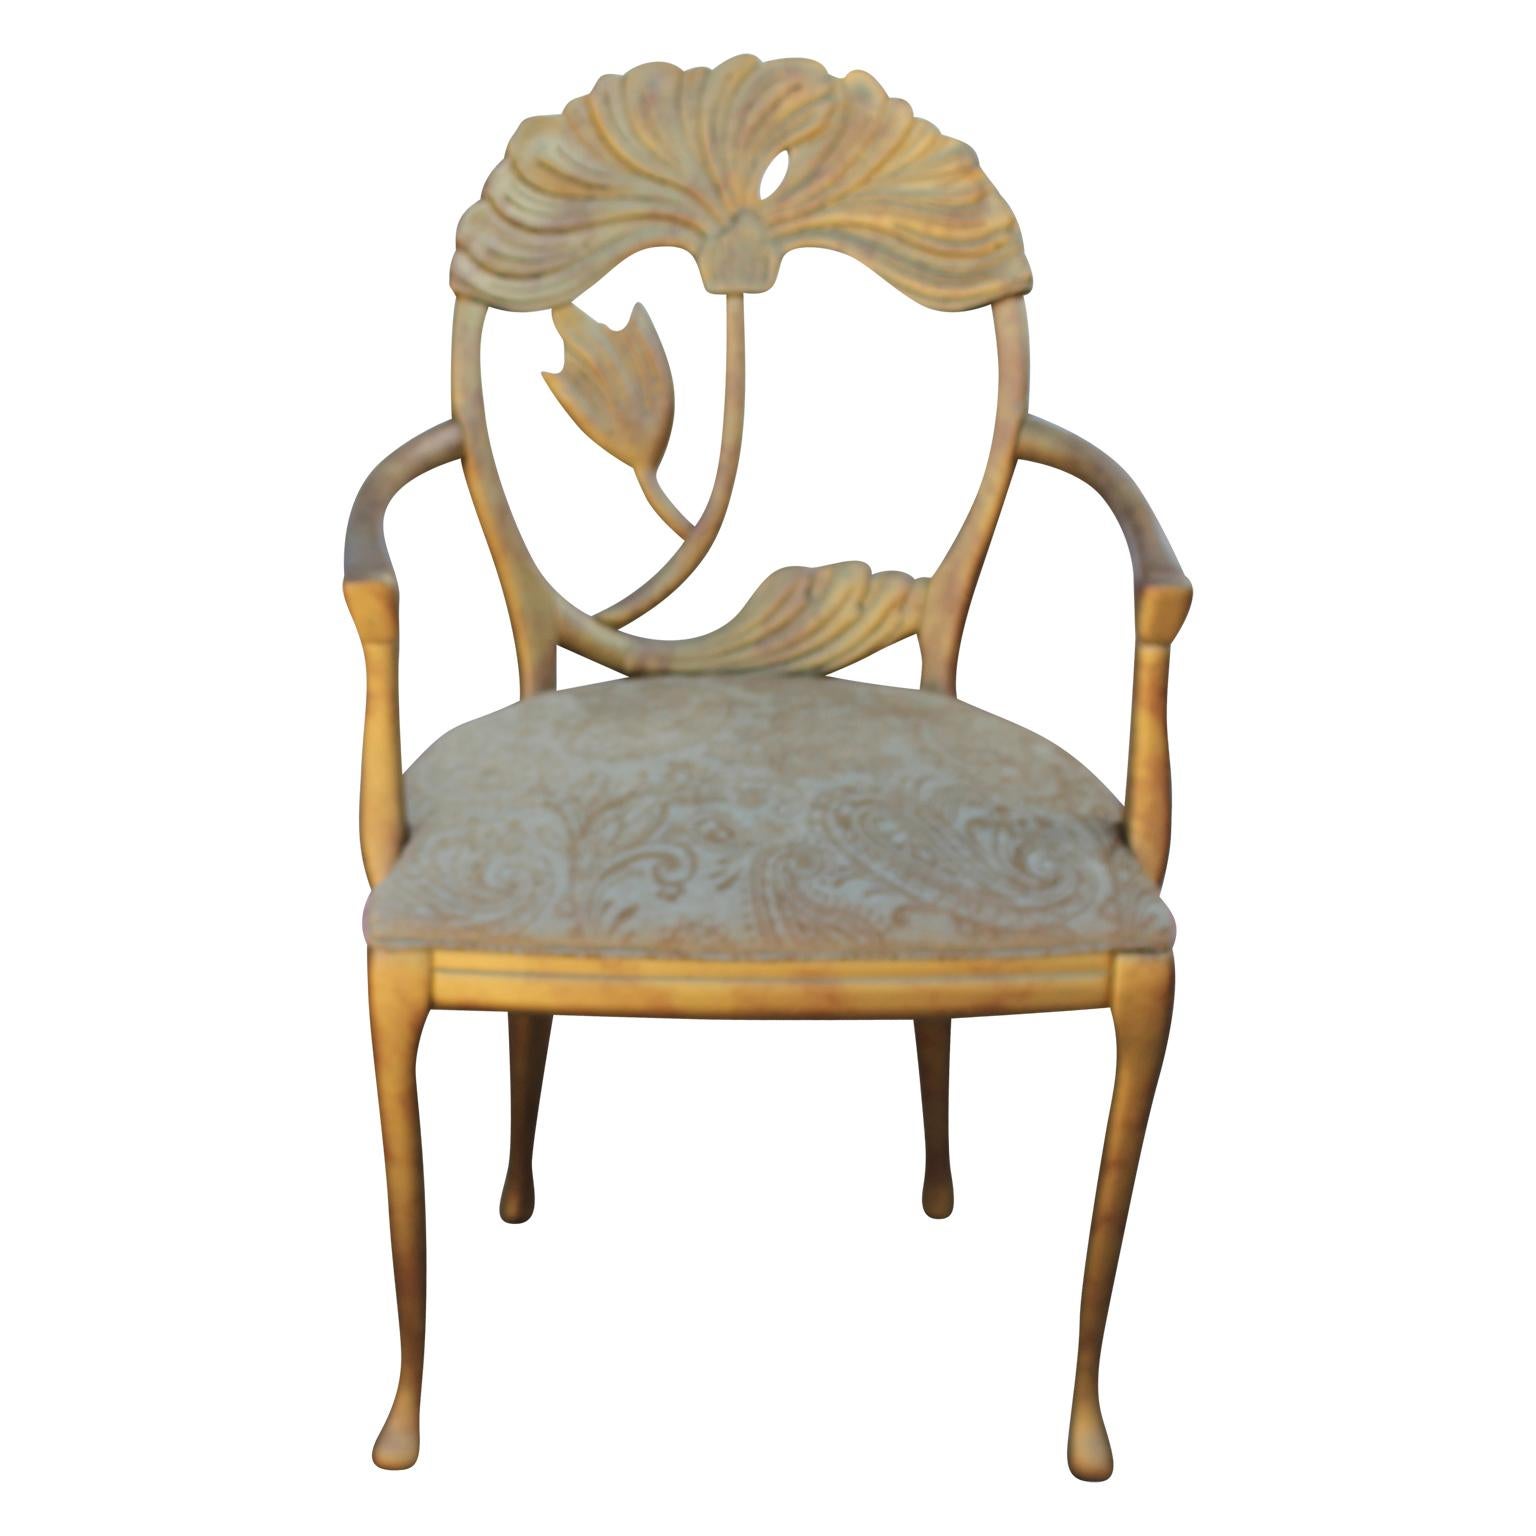 A set of six beautiful Italian Art Nouveau floral-back gold dining chairs. Intricate floral design will be a conversation starter at any dinner party. This set features two chairs with arms and four without.

Dimensions of two chairs with arms:
D